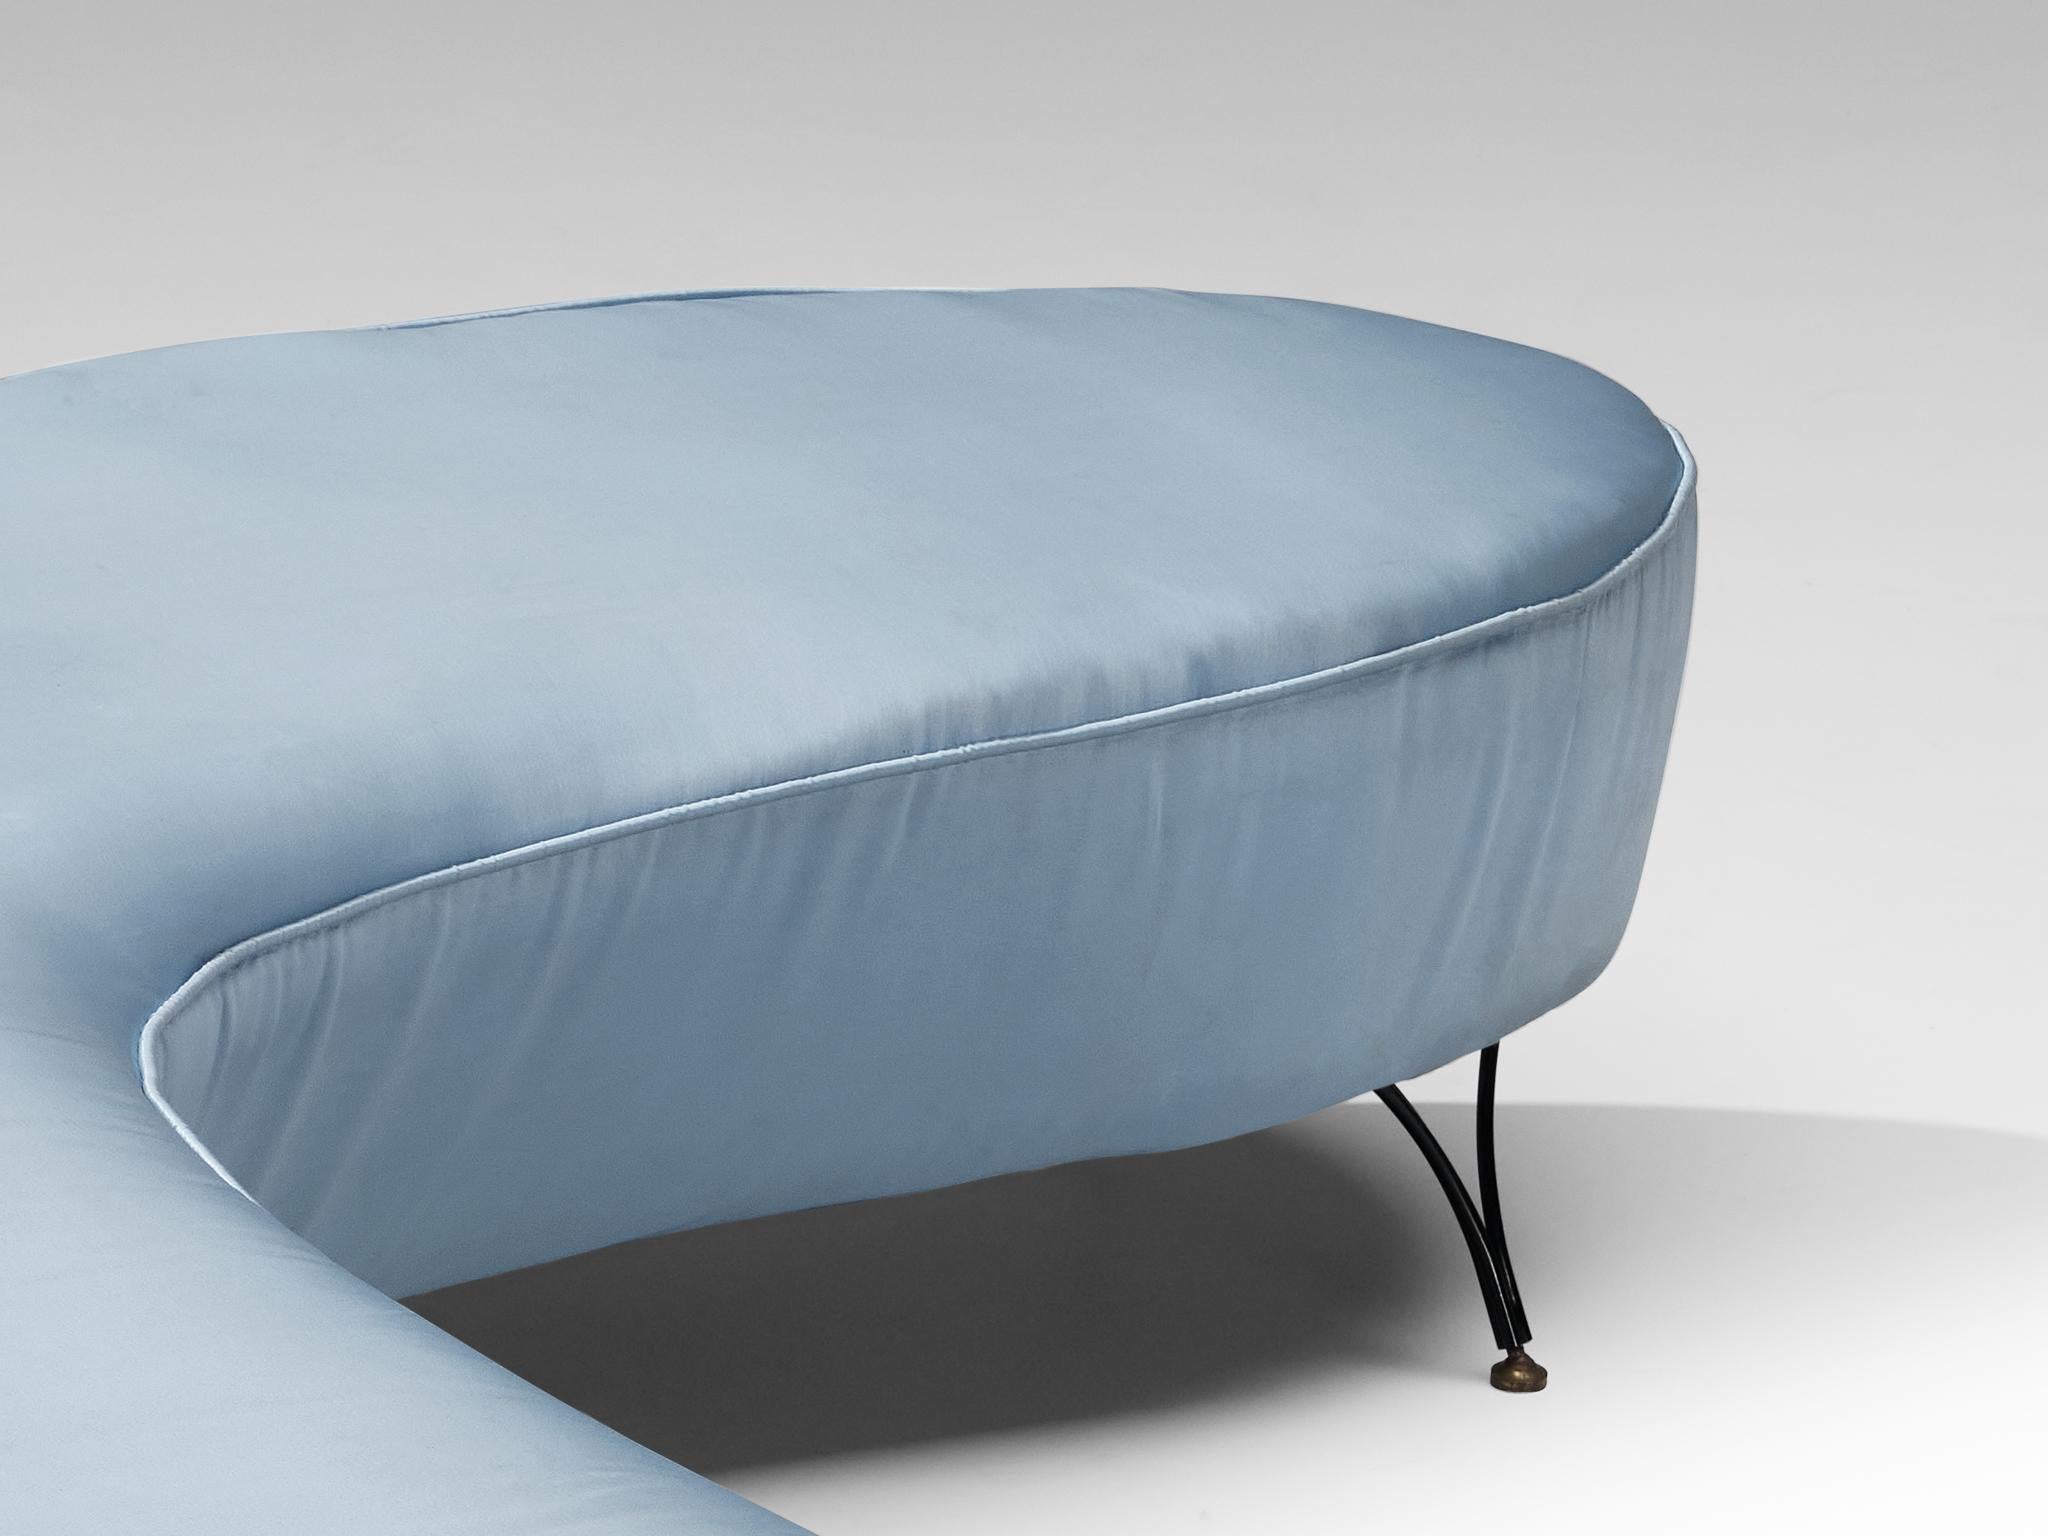 Mid-20th Century Italian Freeform Curved Sofa in Light Blue Upholstery For Sale